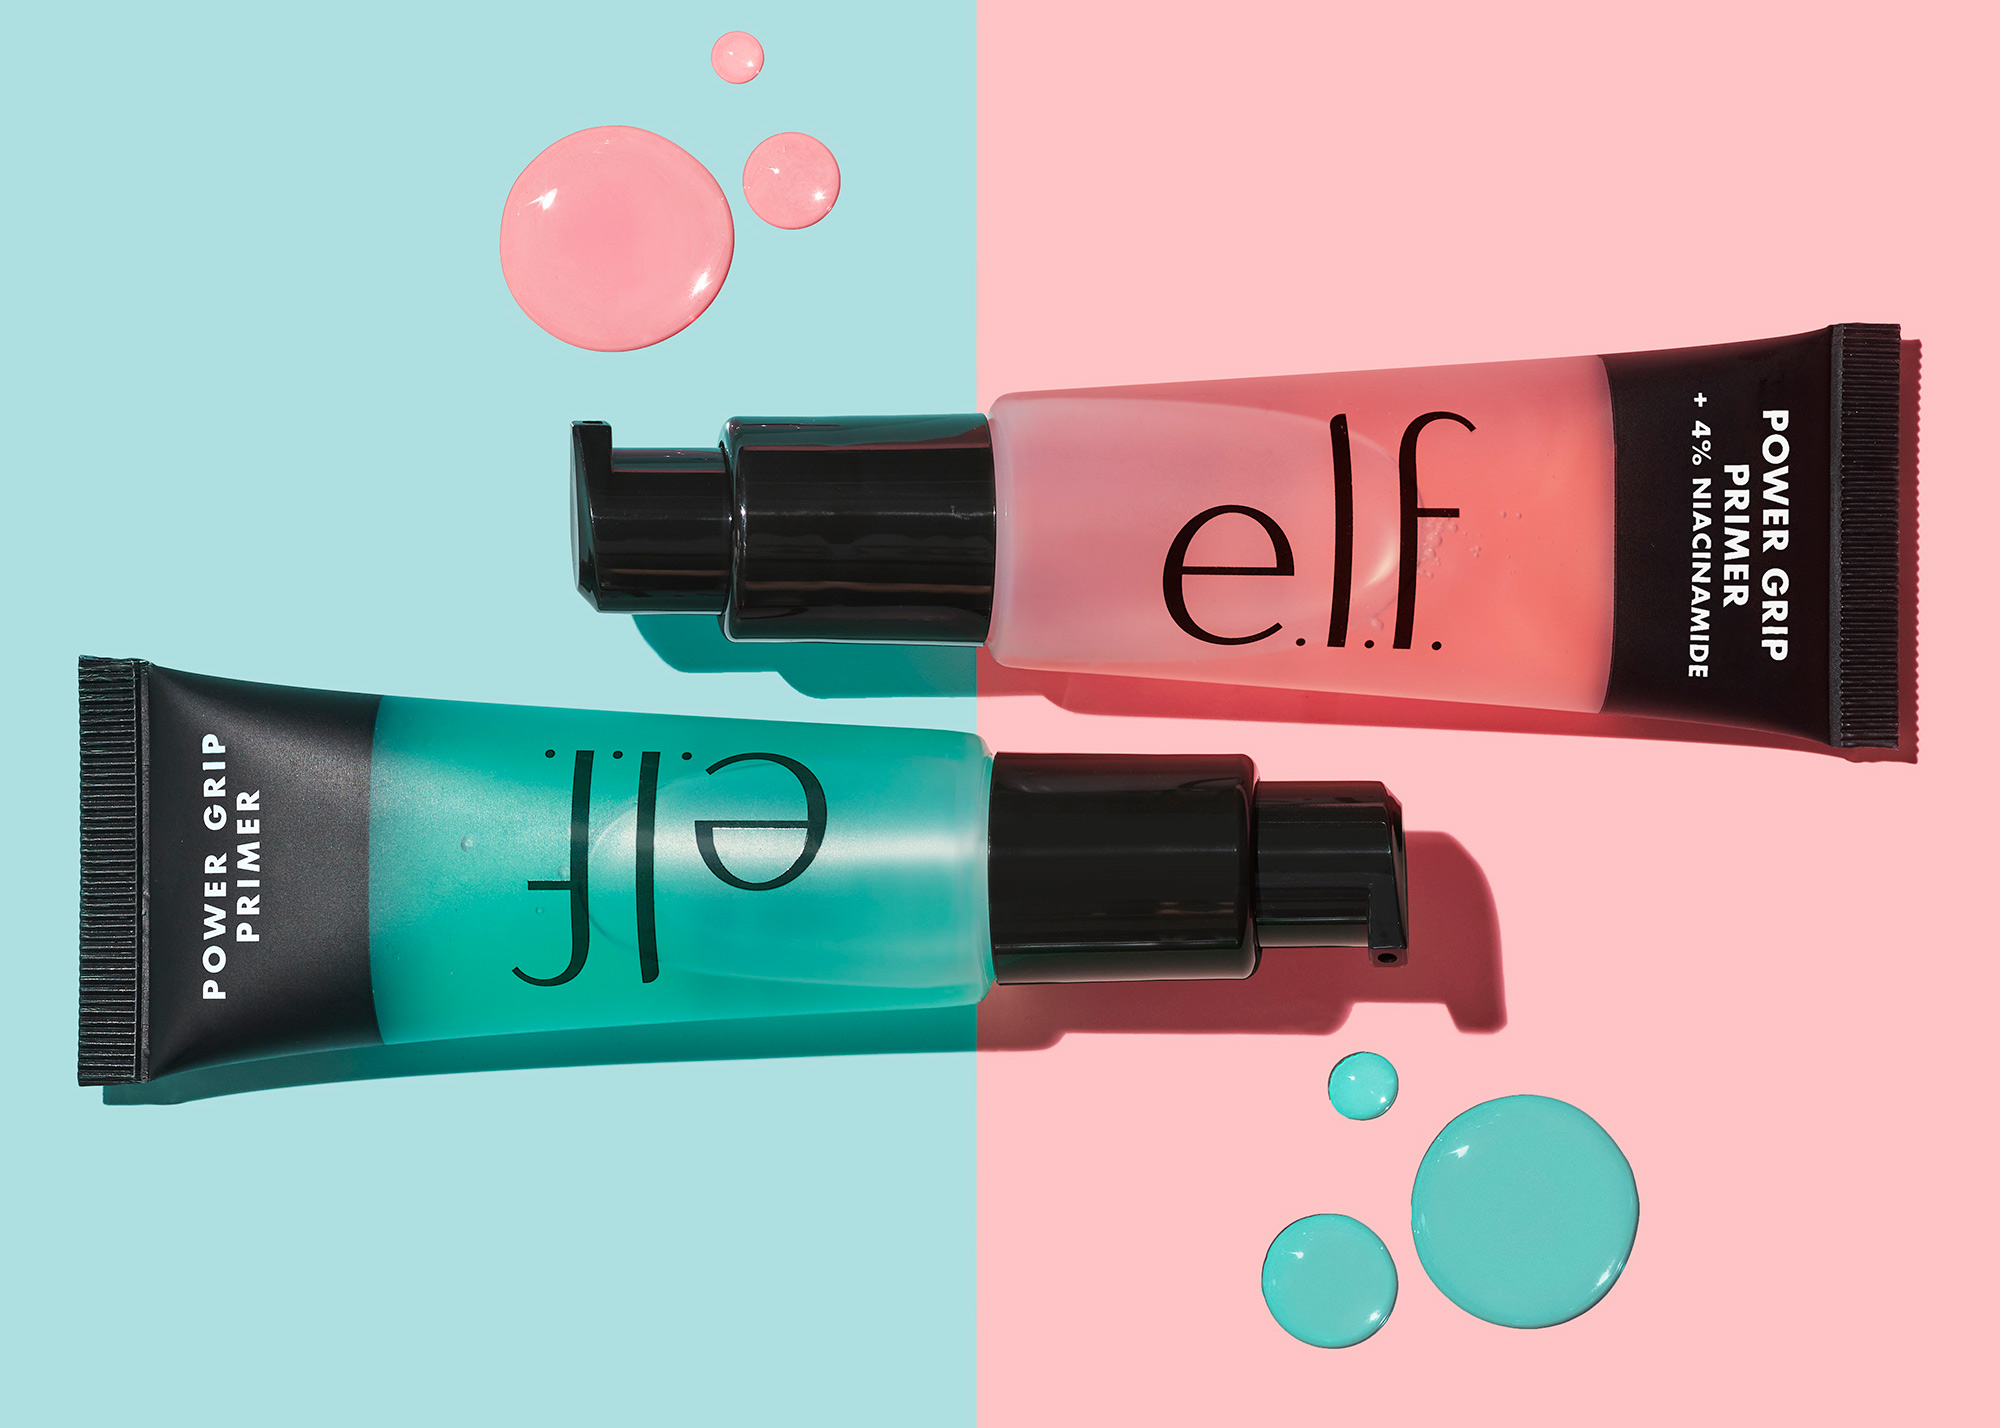 Elf Cosmetics Makeup Pitches Affordable Prices to Masses Bloomberg